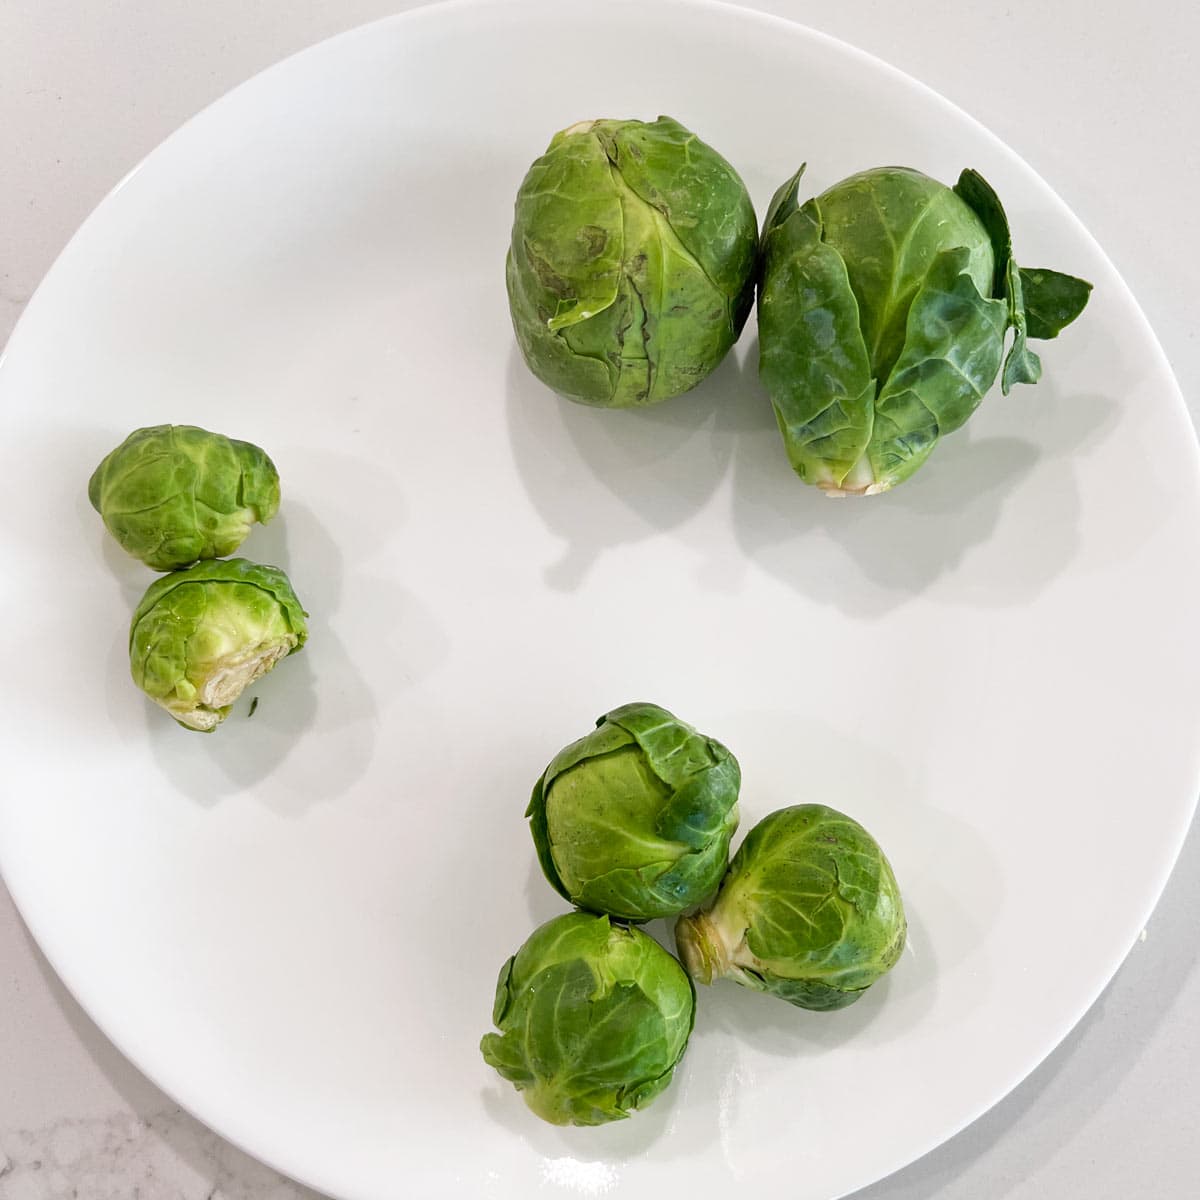 Different sizes of Brussels sprouts.